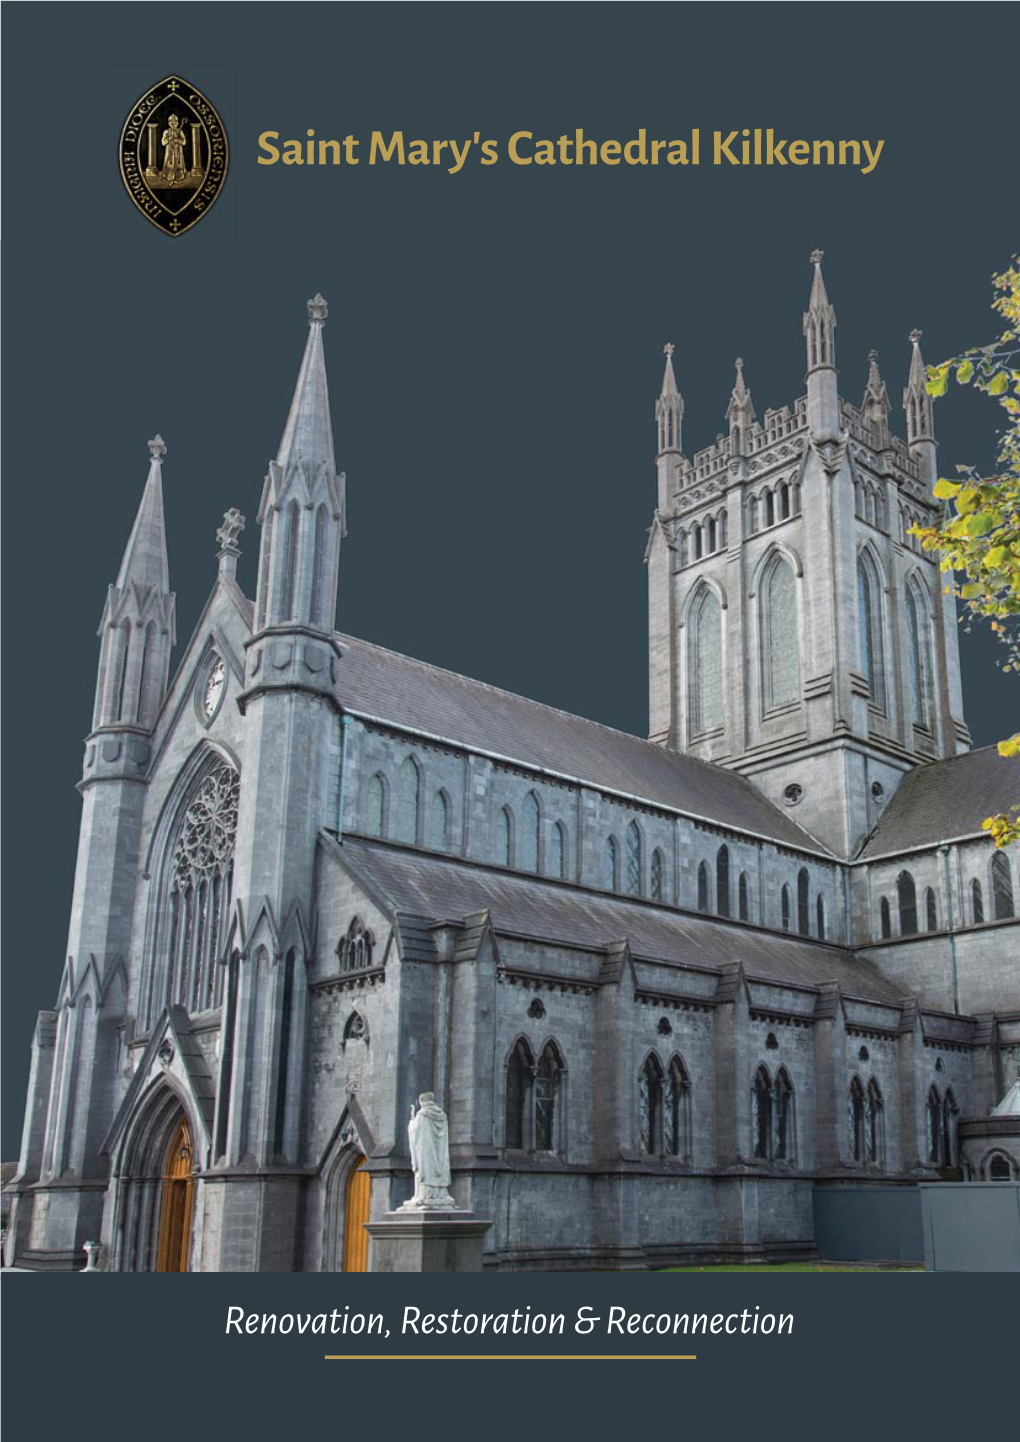 Saint Mary's Cathedral Kilkenny Restoration Project